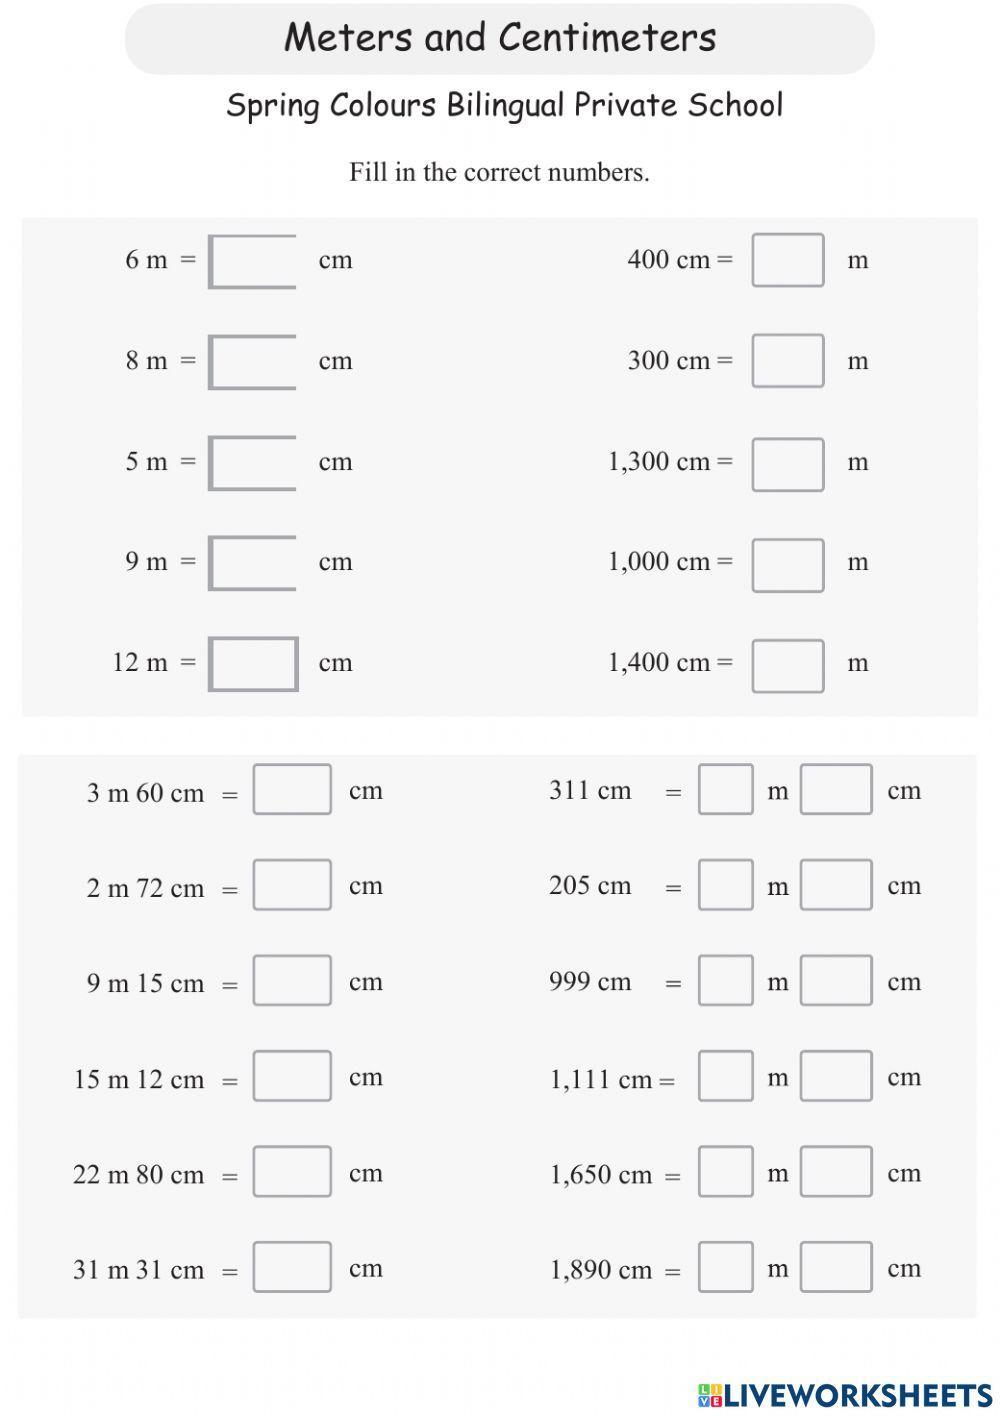 Lengths in centimeters and meters